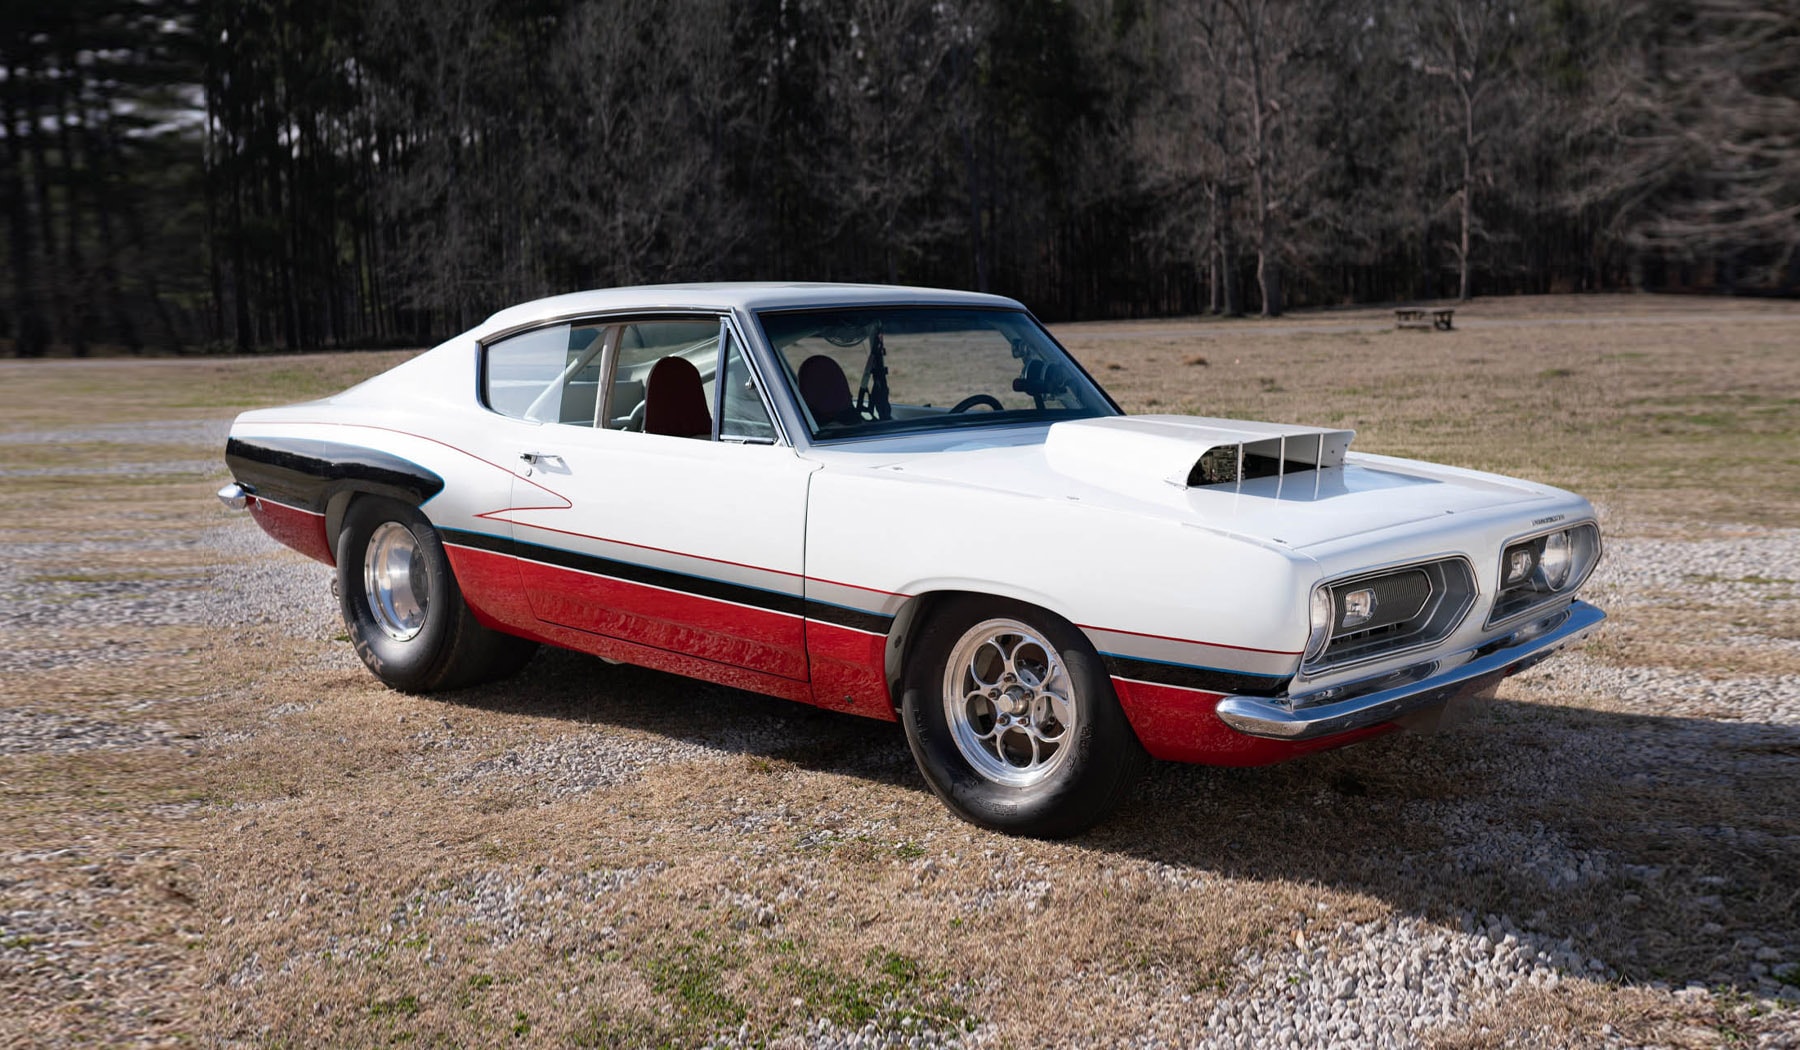 Barracuda B029 Super Stock: One of the Rarest and Fastest Muscle Cars of the ’60s